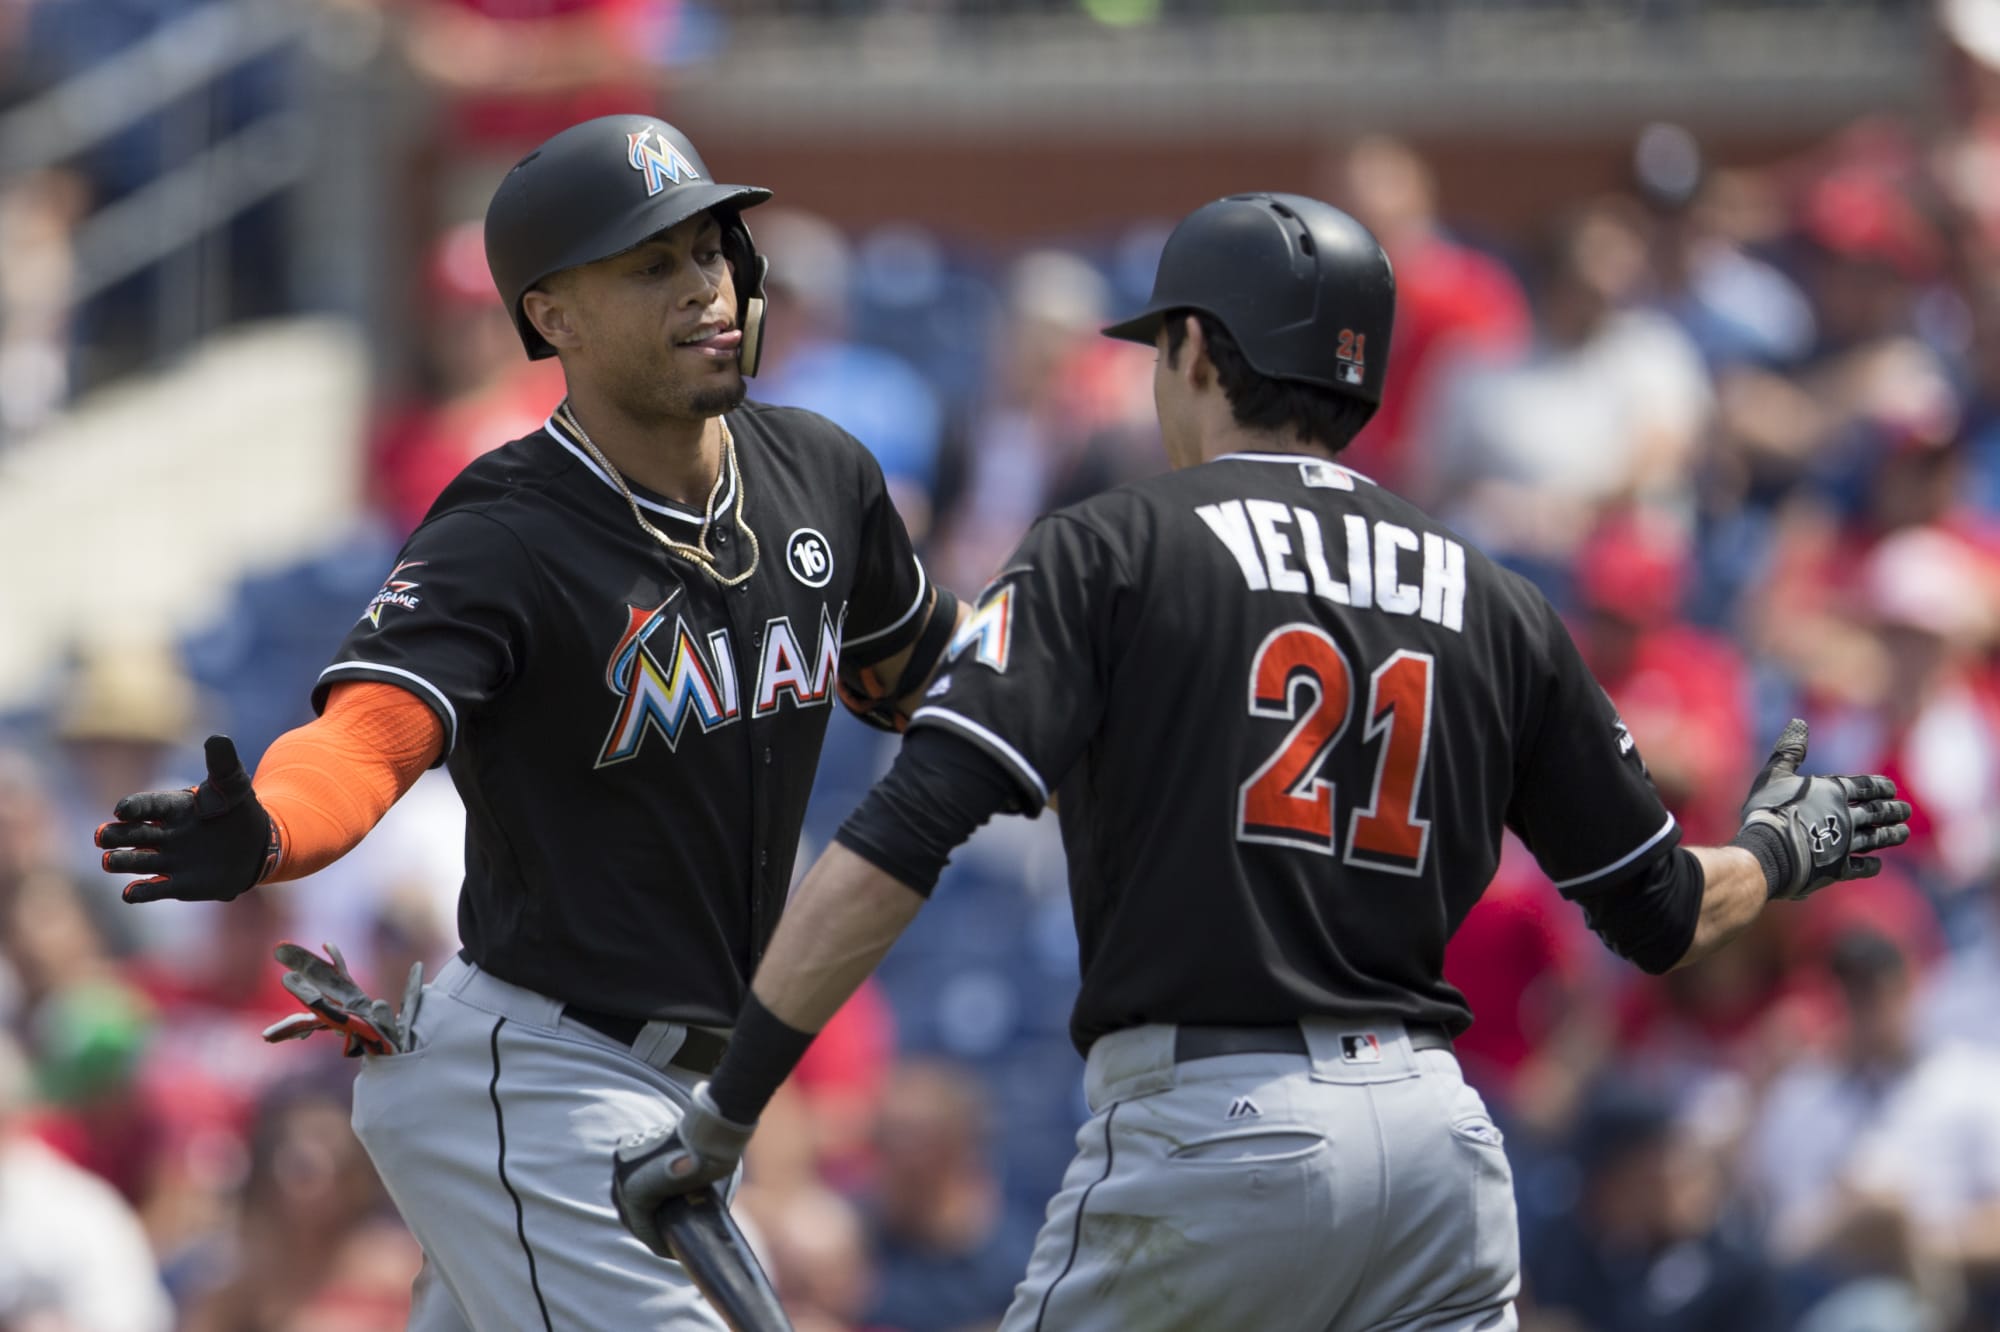 Miami Marlins: To fix team, honesty should be new policy